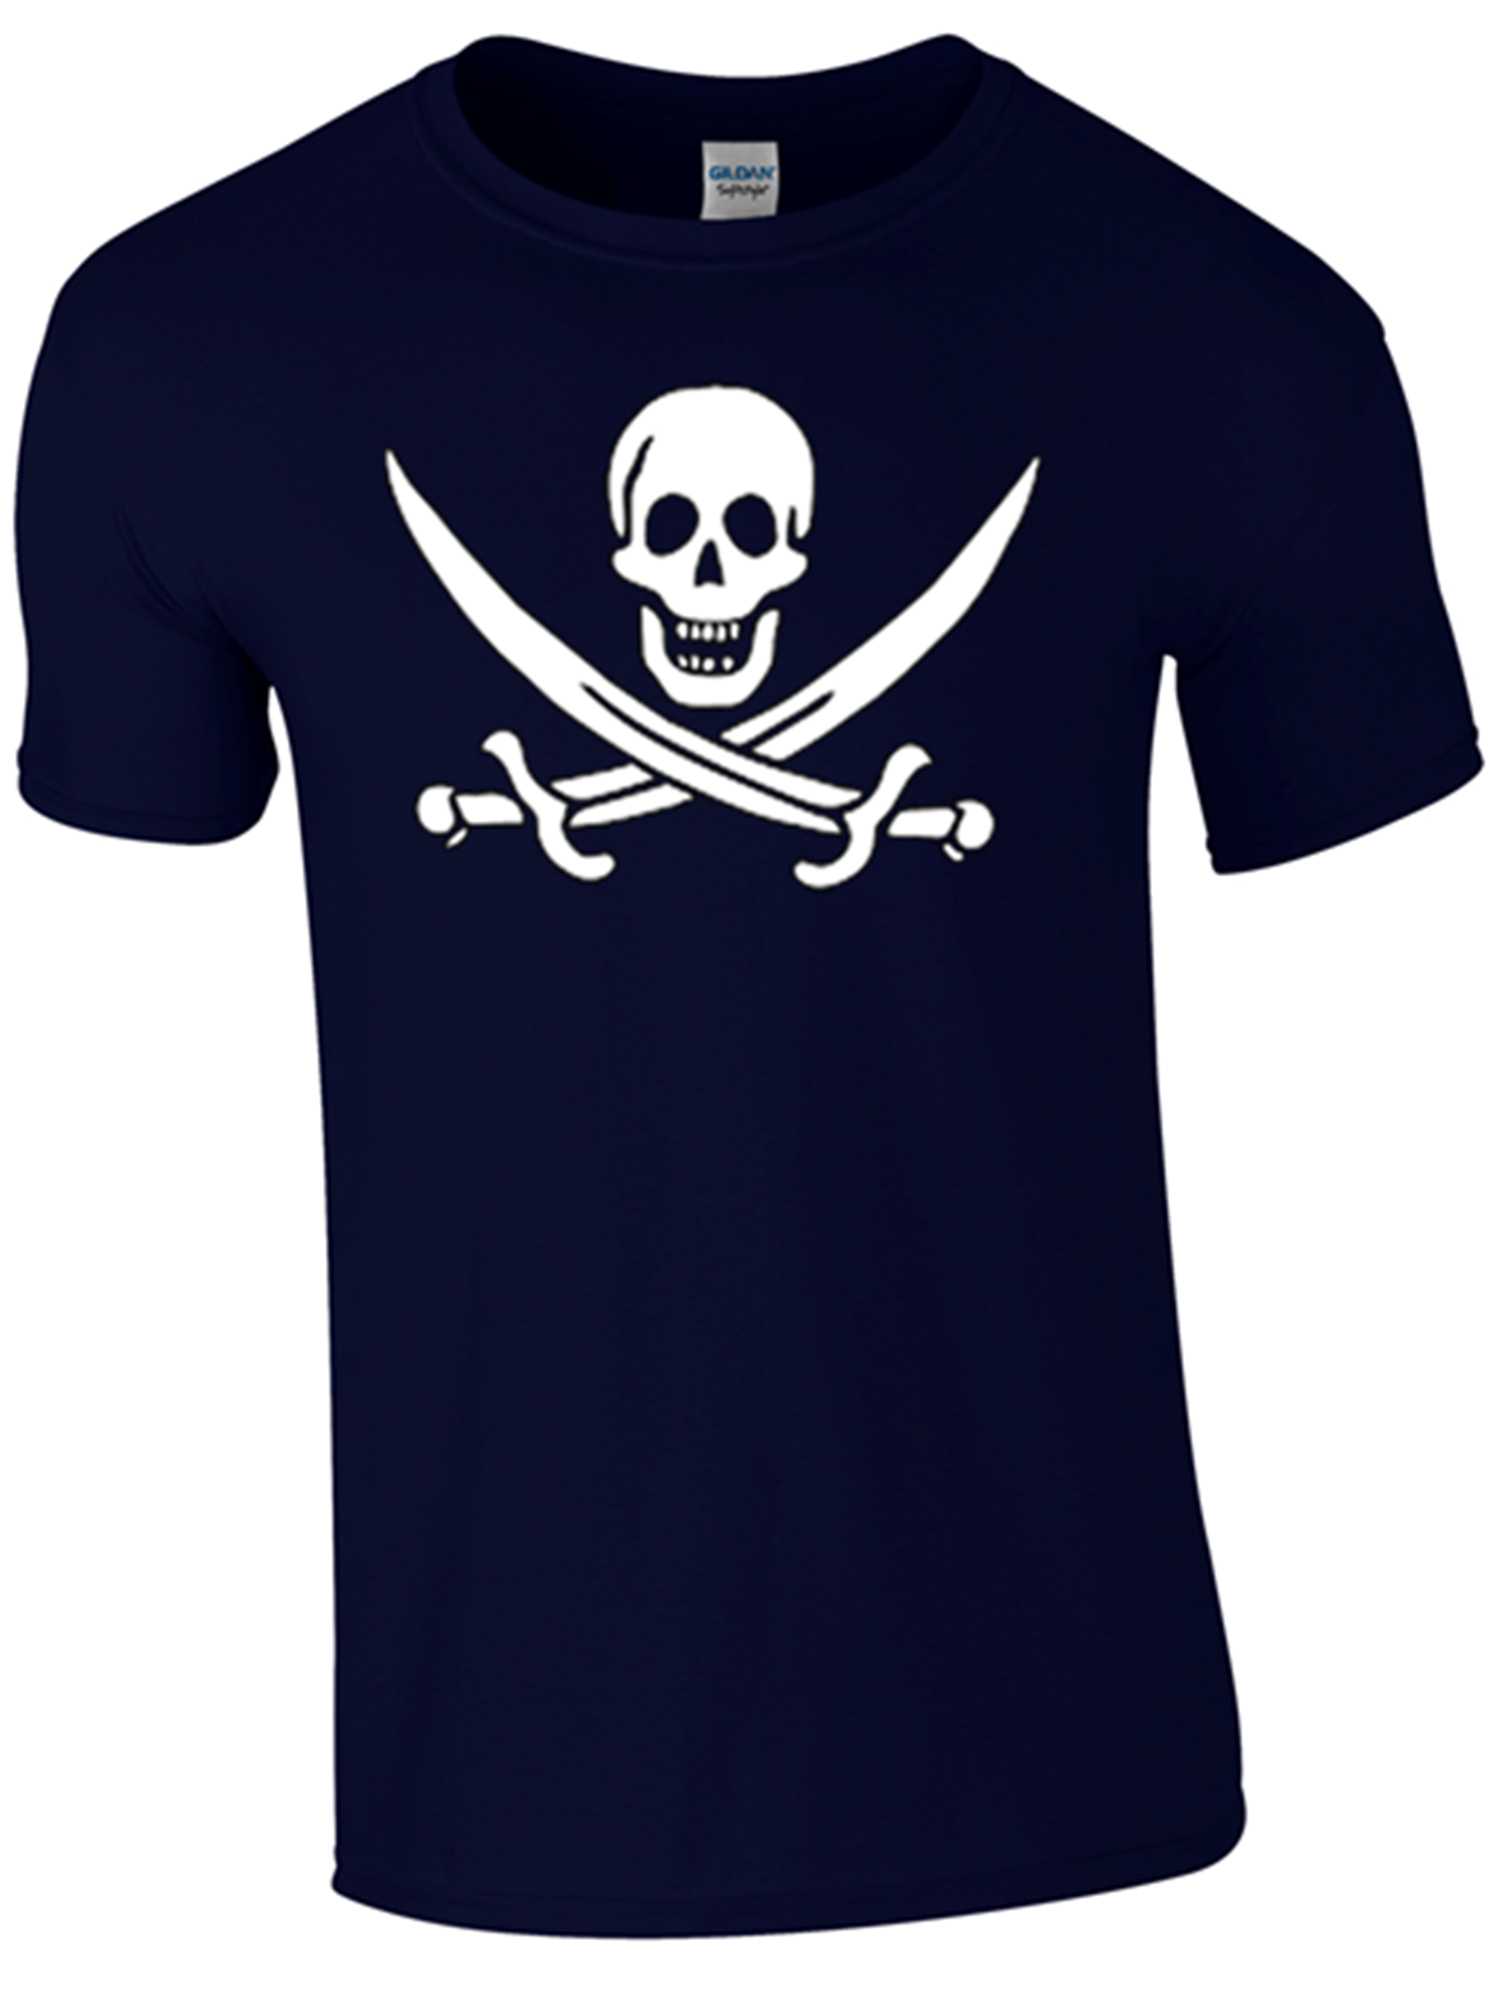 Pirate T-Shirt Printed DTG (Direct to Garment) for a Permanent Finish. - Army 1157 kit S / Navy Blue Army 1157 Kit Veterans Owned Business